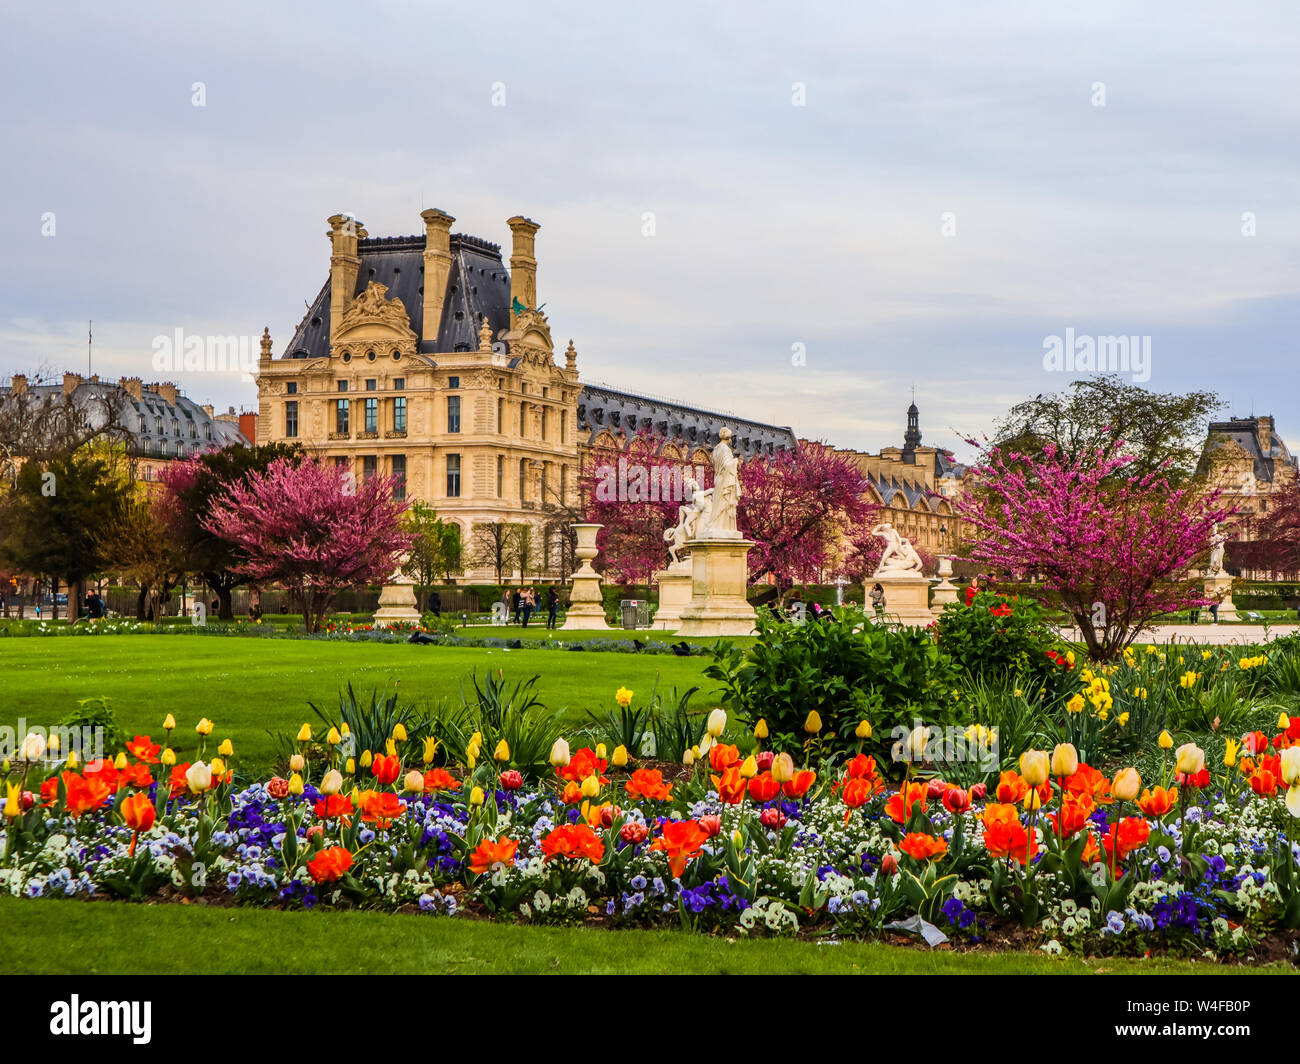 Marvelous spring Tuileries garden and view at the Louvre Palace in Paris France. April 2019 Stock Photo